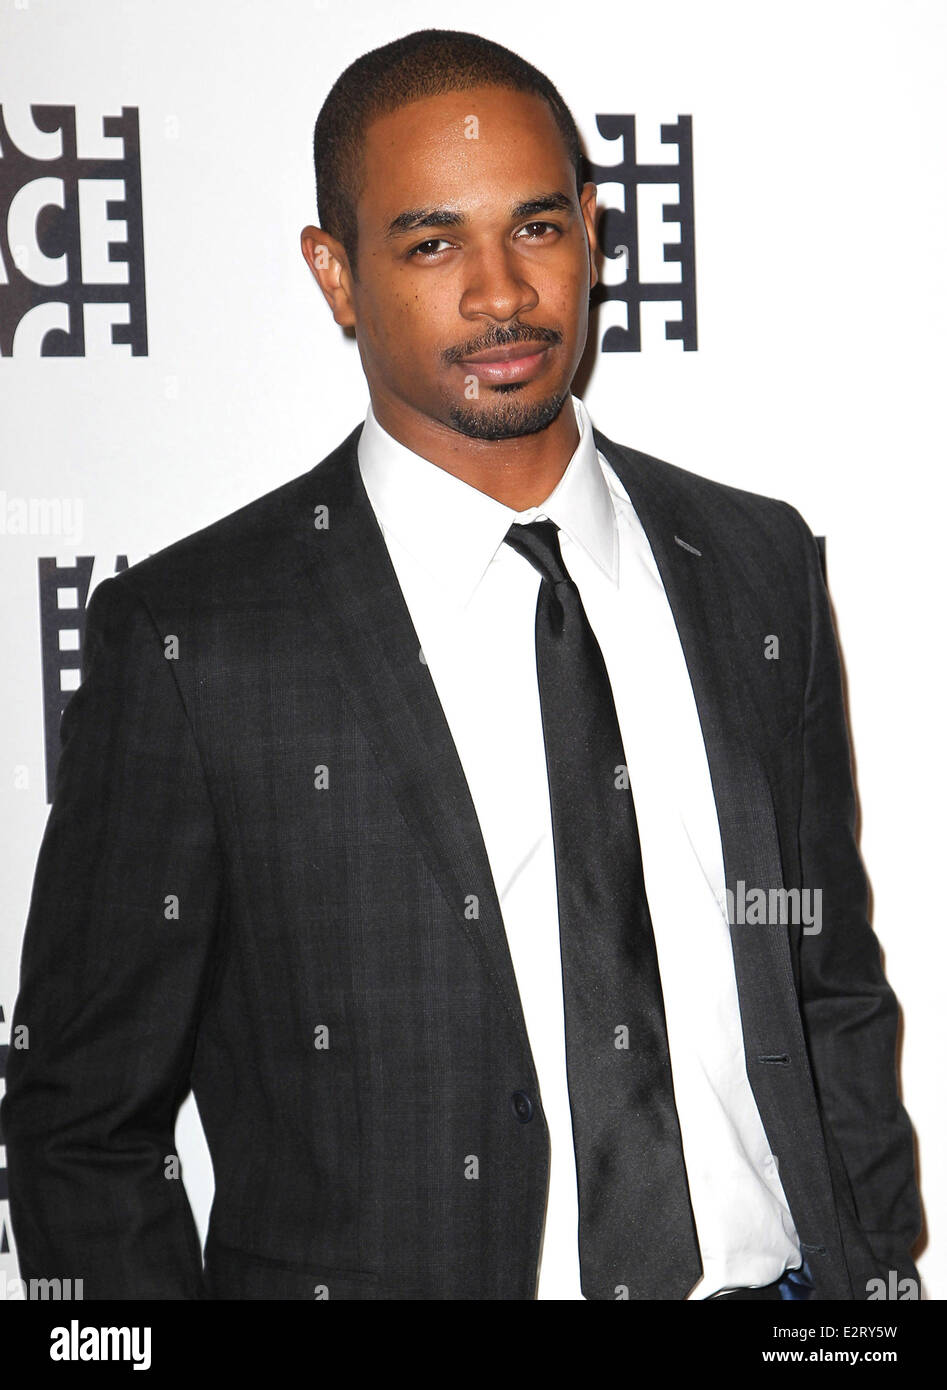 63rd Annual ACE Eddie Awards, held at The Beverly Hilton Hotel - Arrivals  Featuring: Damon Wayans,Jr. Where: Los Angeles, California, United States When: 16 Feb 2013 Stock Photo